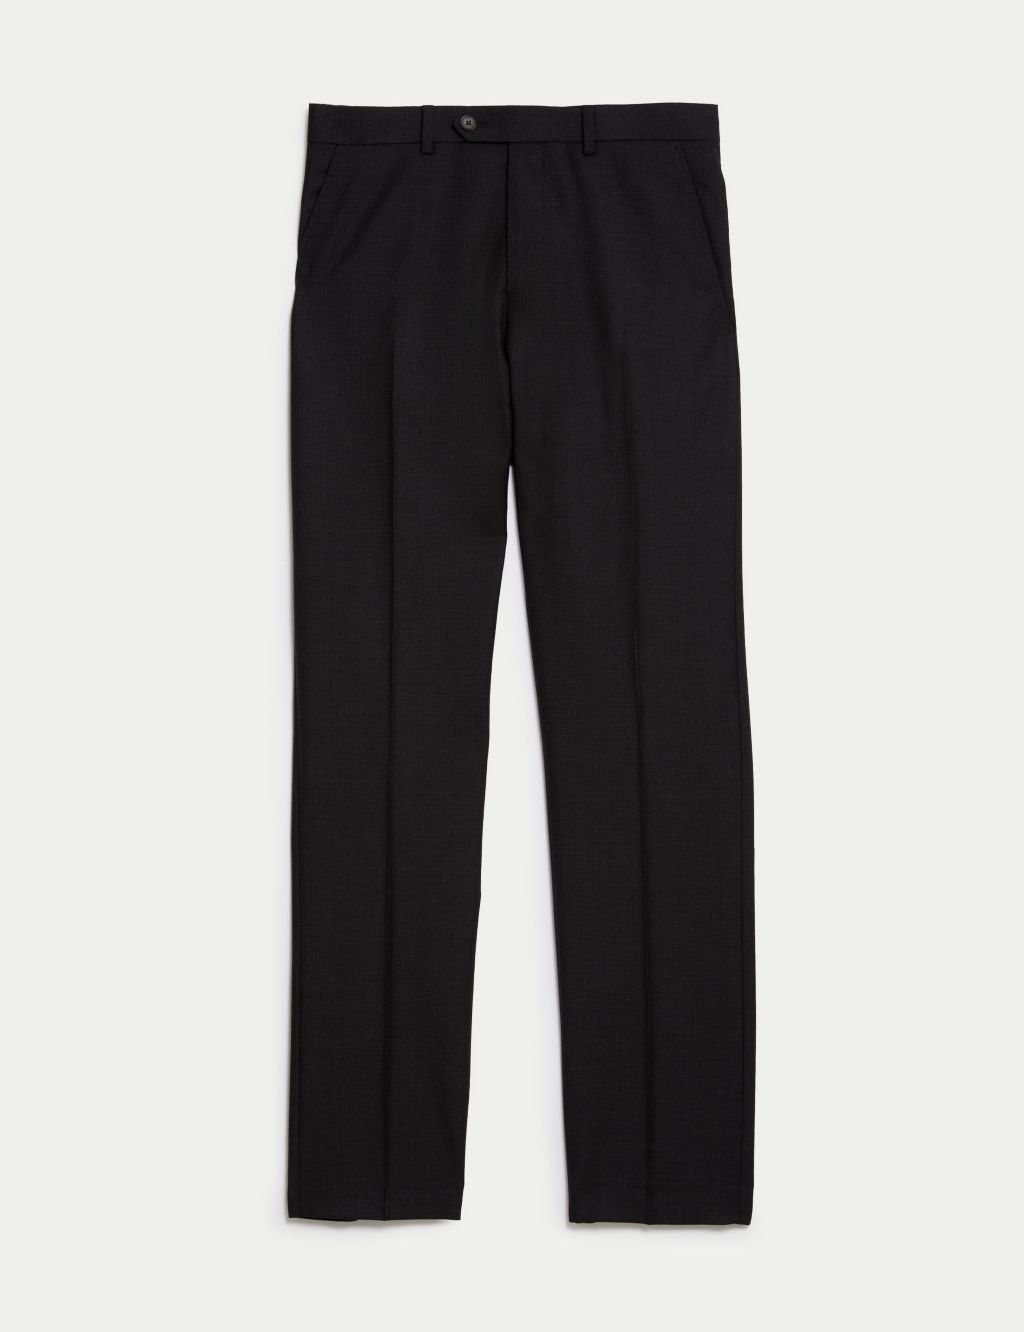 Tailored Fit Pure Wool Check Trousers image 1